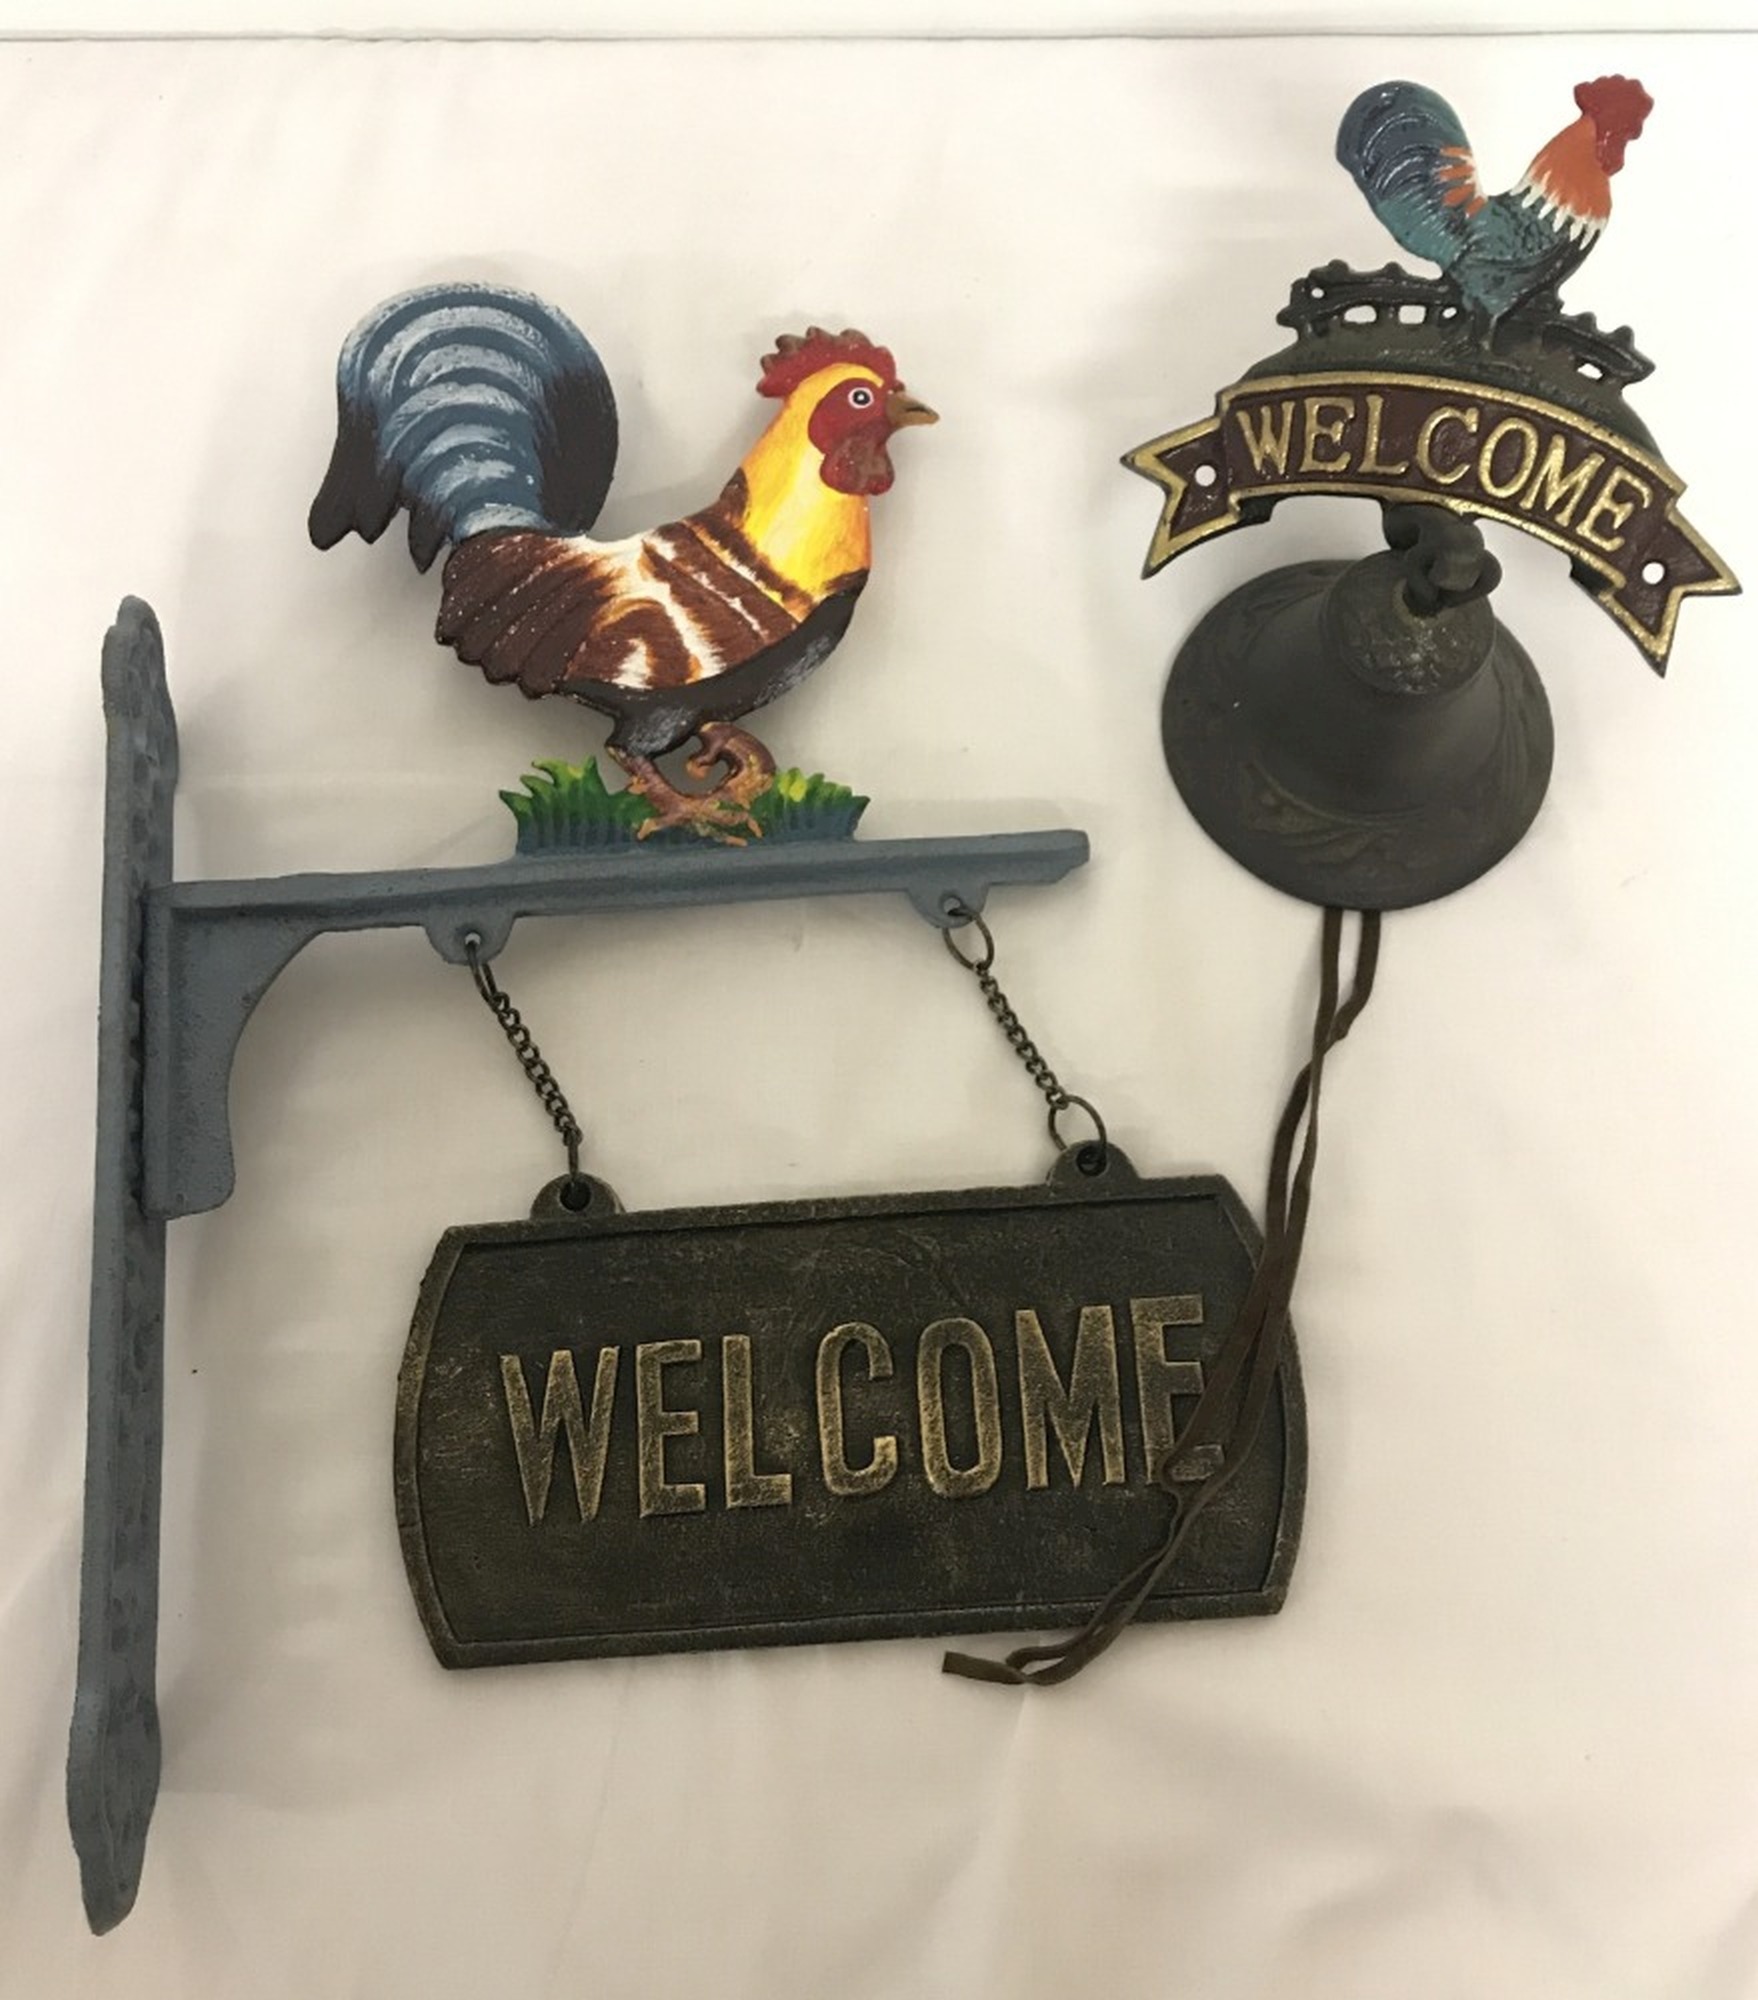 2 painted cast iron wall hanging "Welcome" signs with cockerel detail.